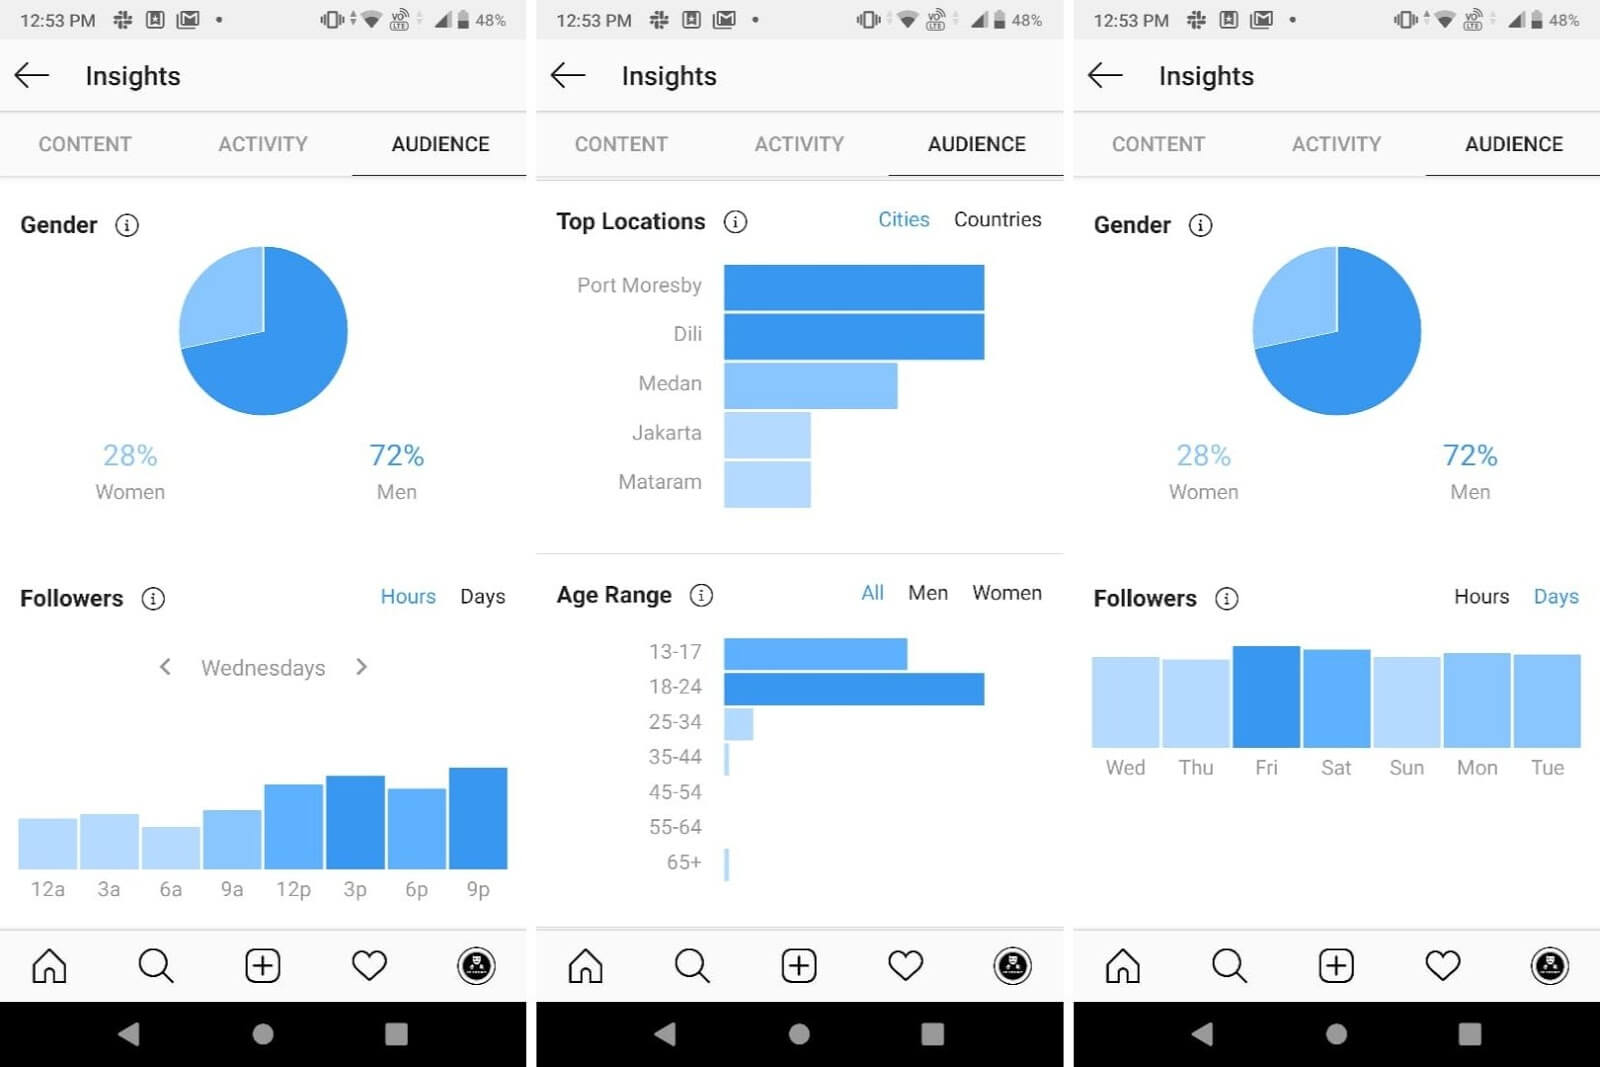 insights on follower Time to Post on Instagram